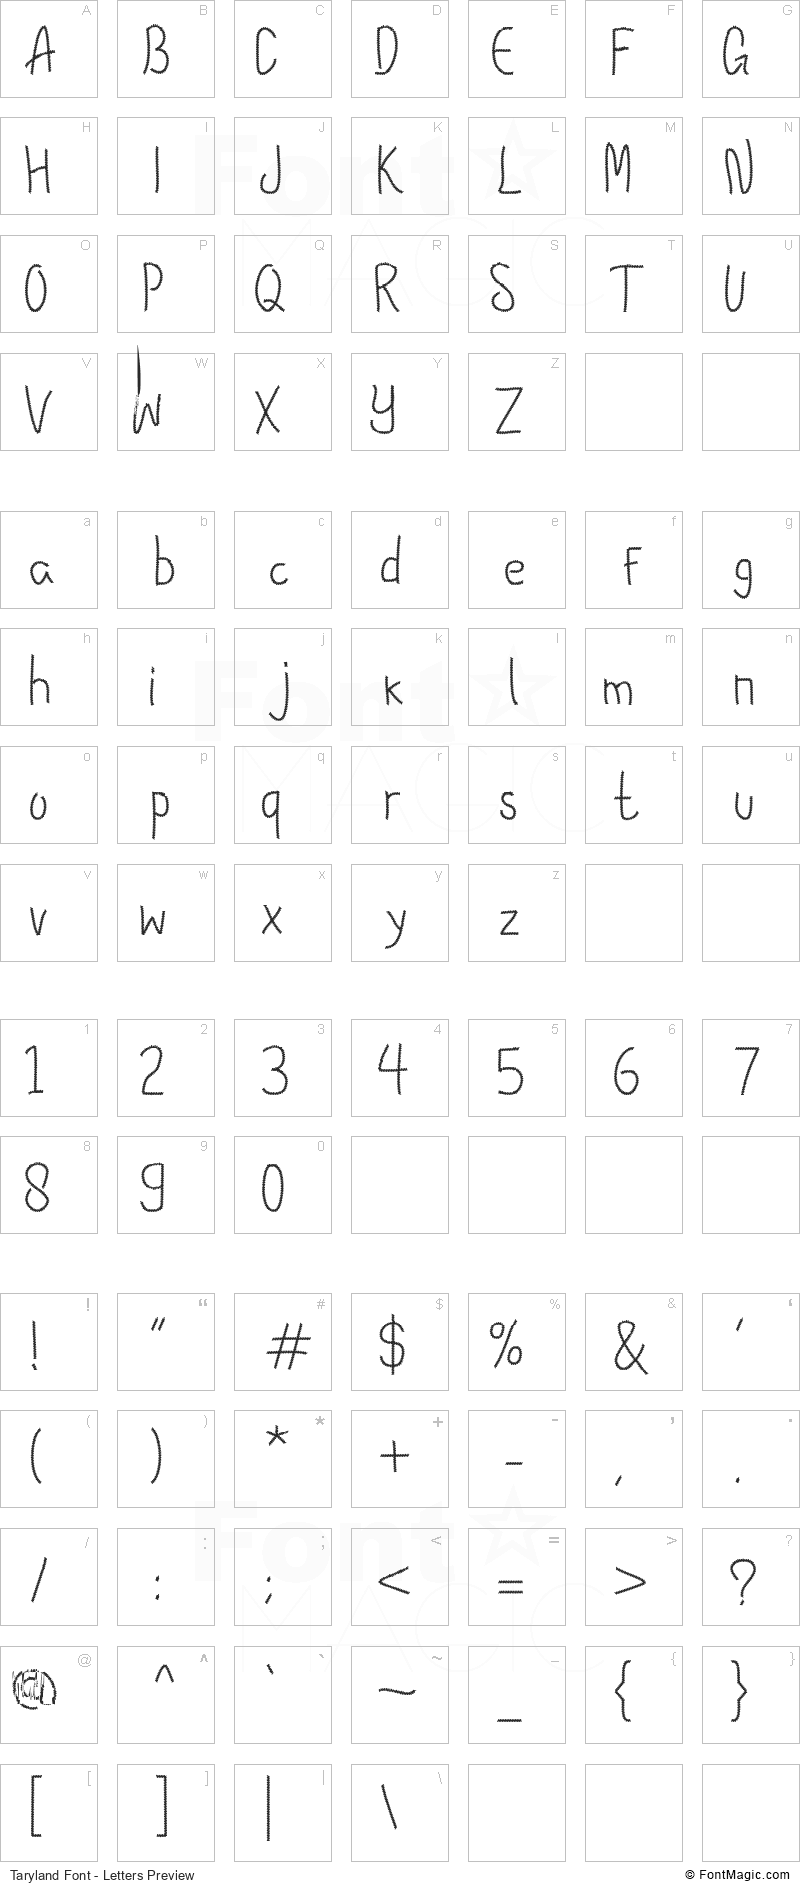 Taryland Font - All Latters Preview Chart